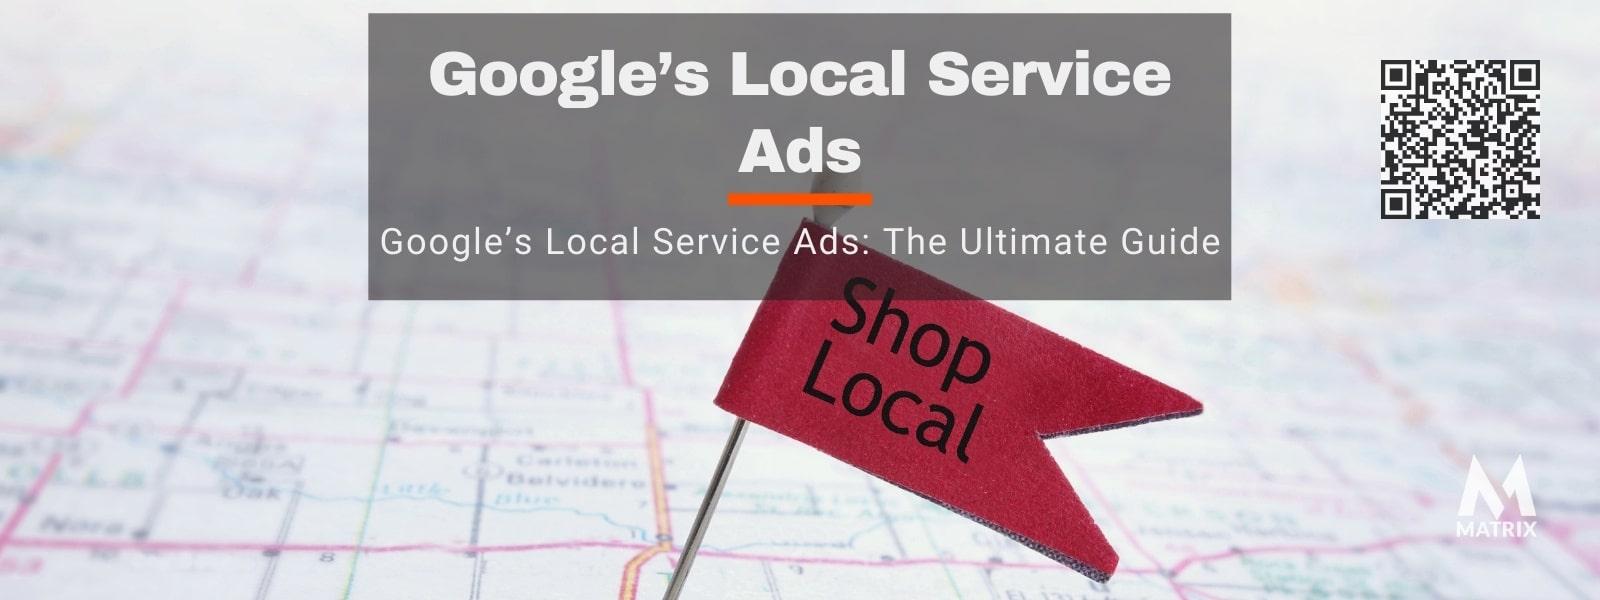 Product Perfect Google Local Service Ads: The #1 Ultimate Guide - Powered by AI image